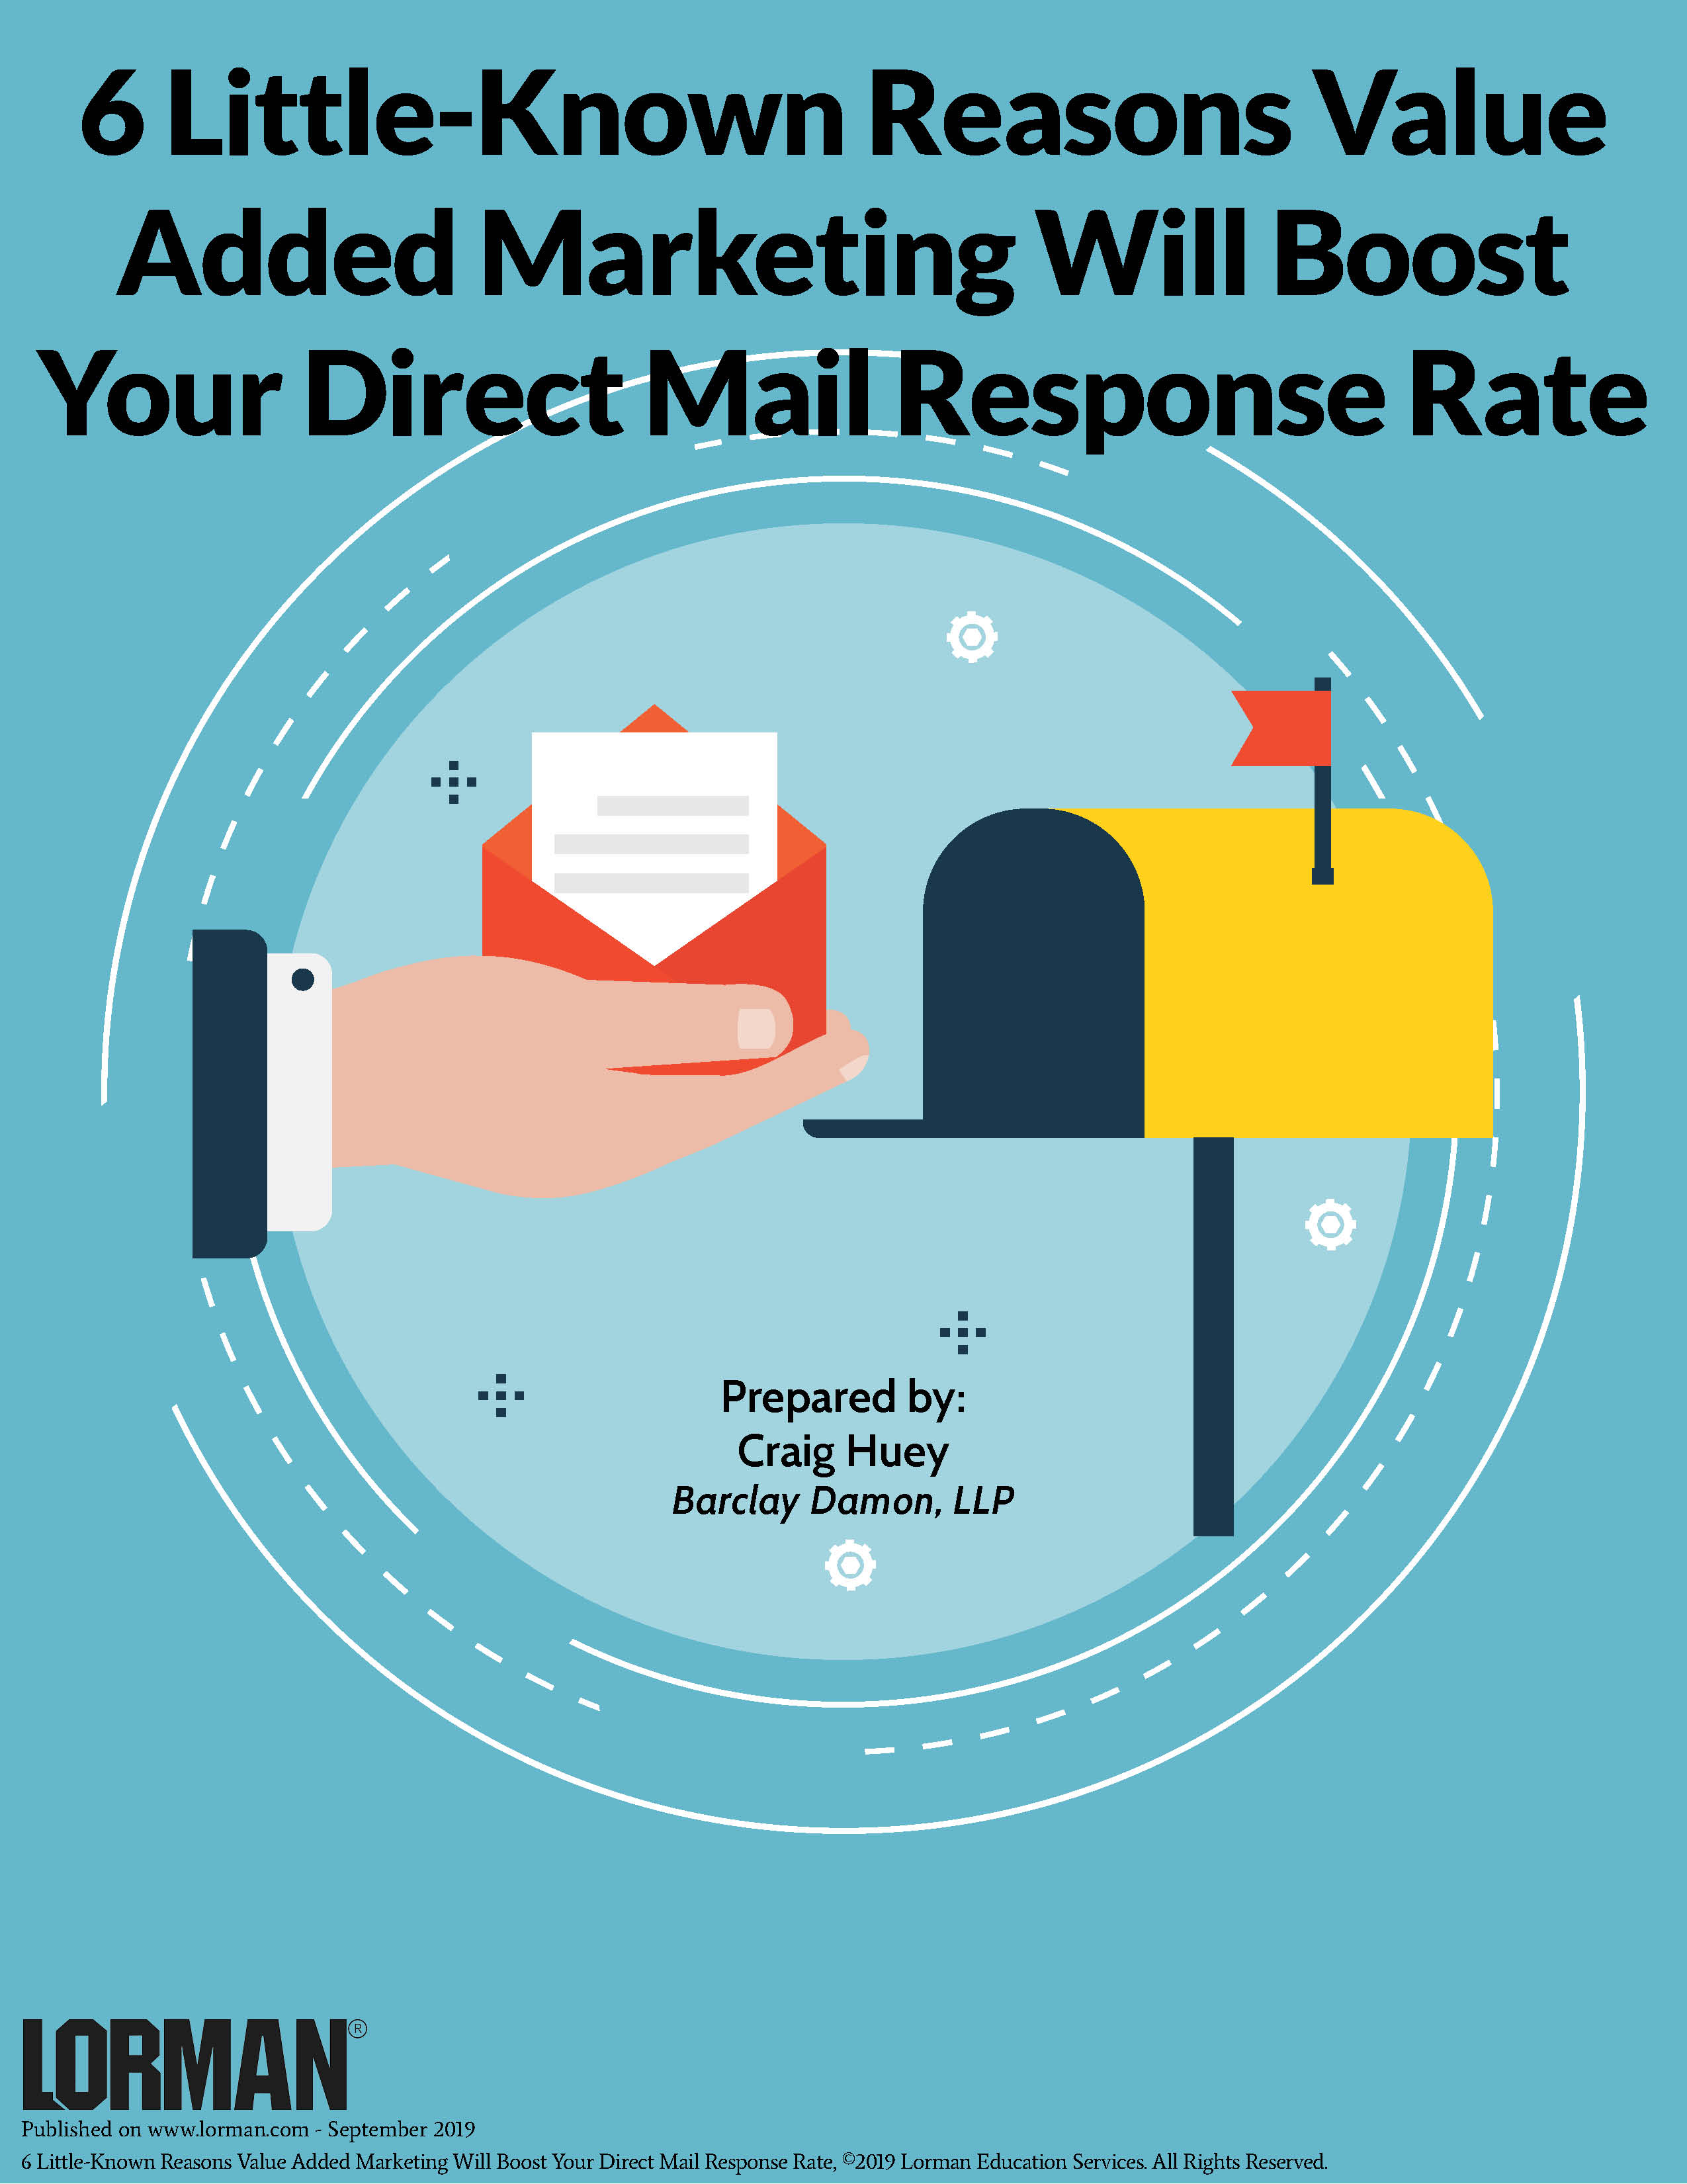 6 Little-Known Reasons Value Added Marketing Will Boost Your Direct Mail Response Rate